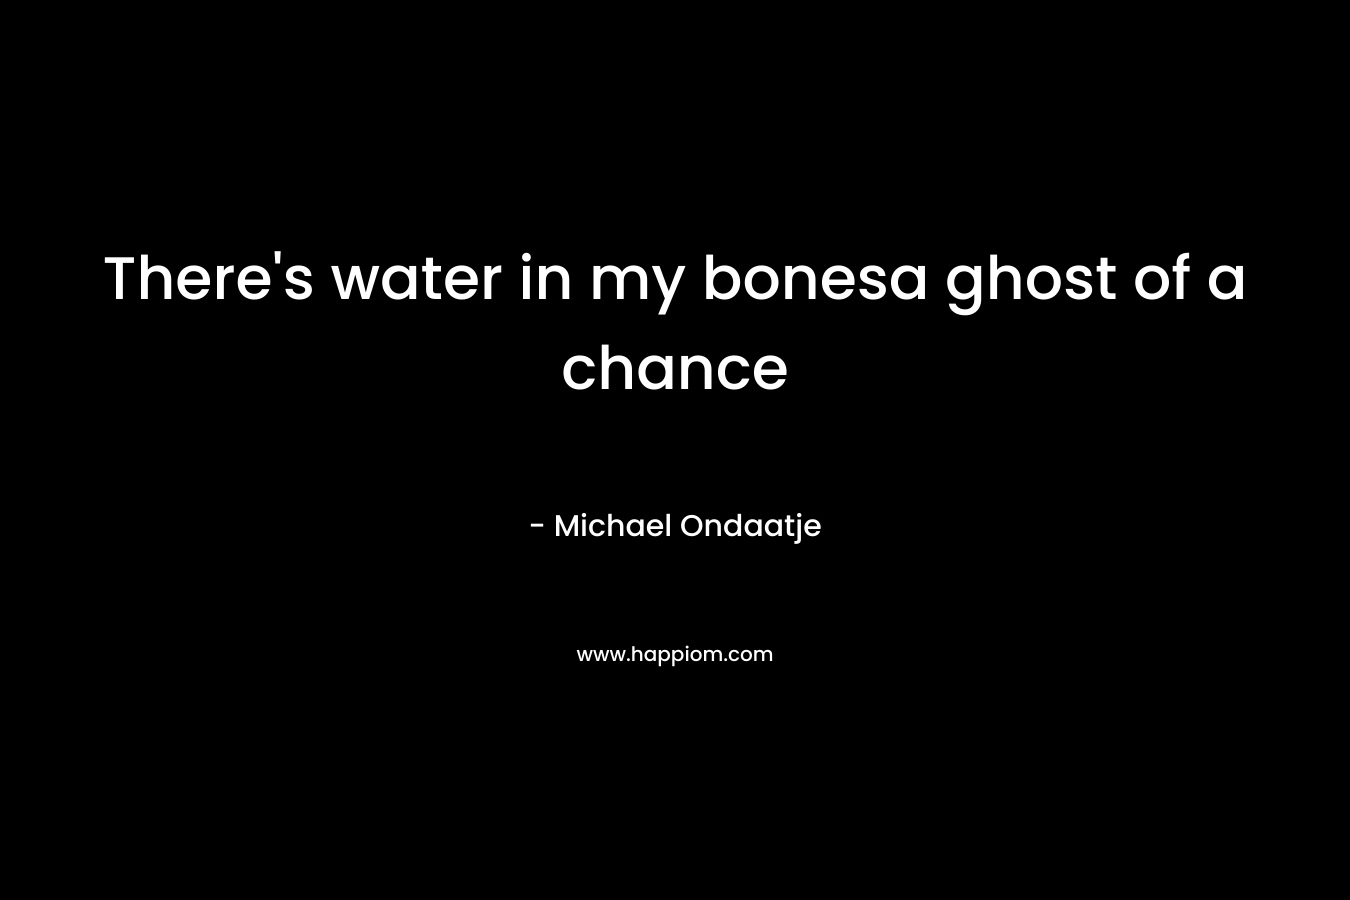 There's water in my bonesa ghost of a chance